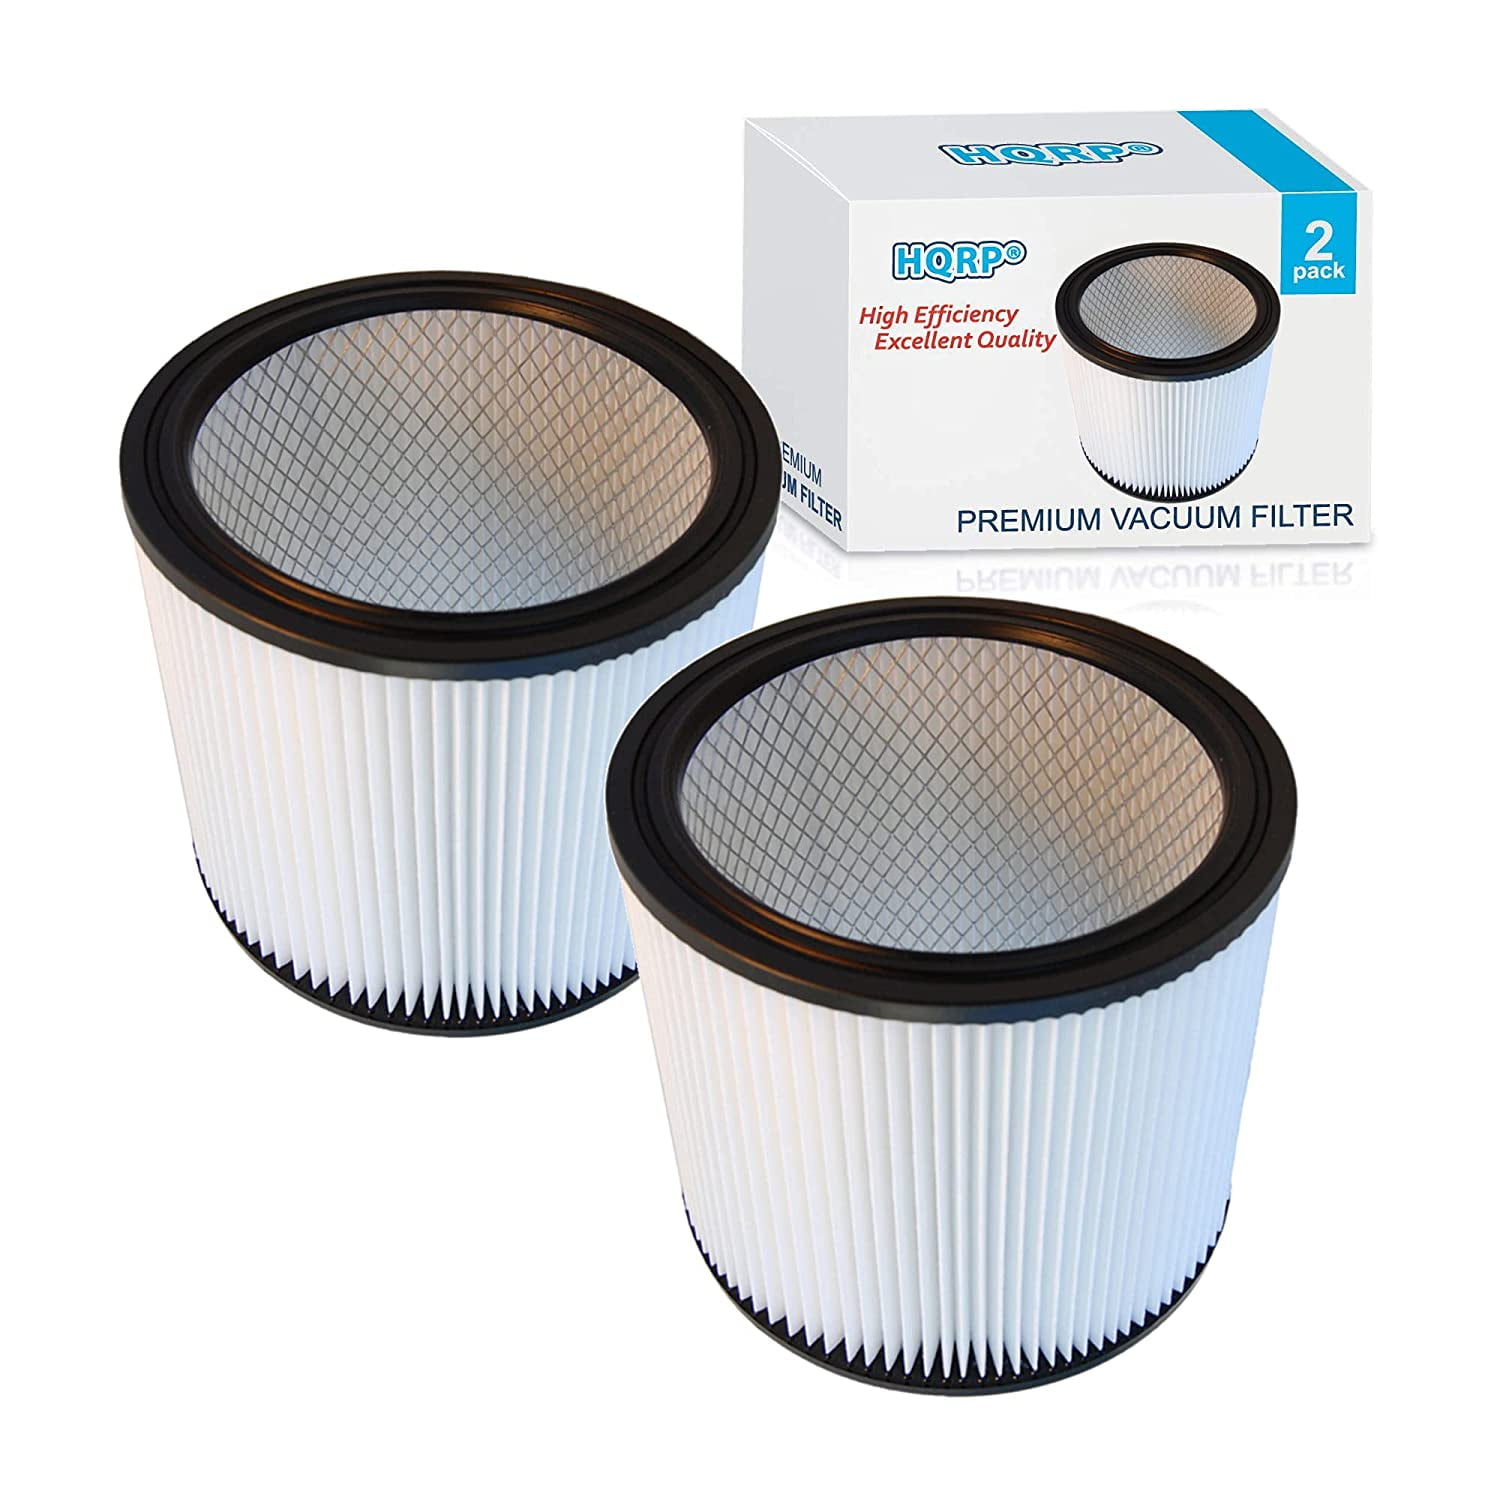 5 Gallon Replacement Filter Cartridge for Shop Vac W/Retaining Lid 4518600 90304 